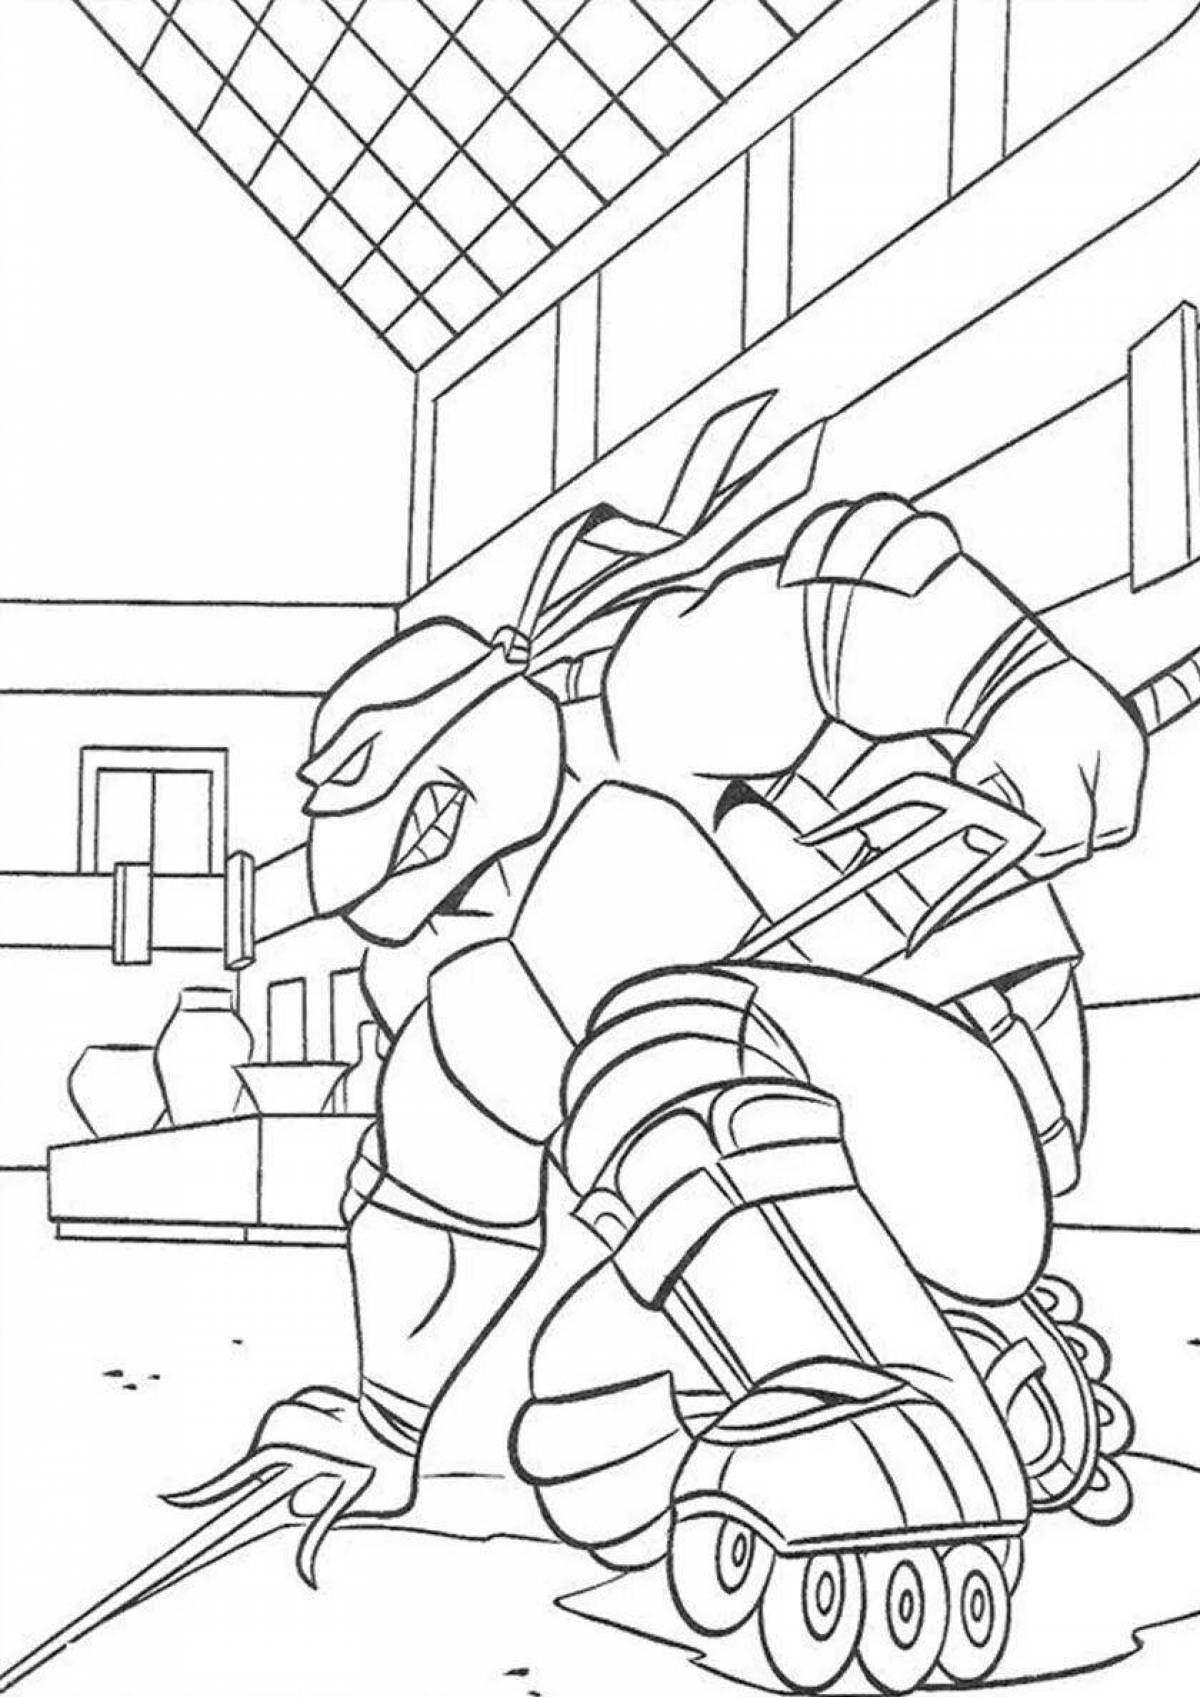 Raphael turtle coloring page